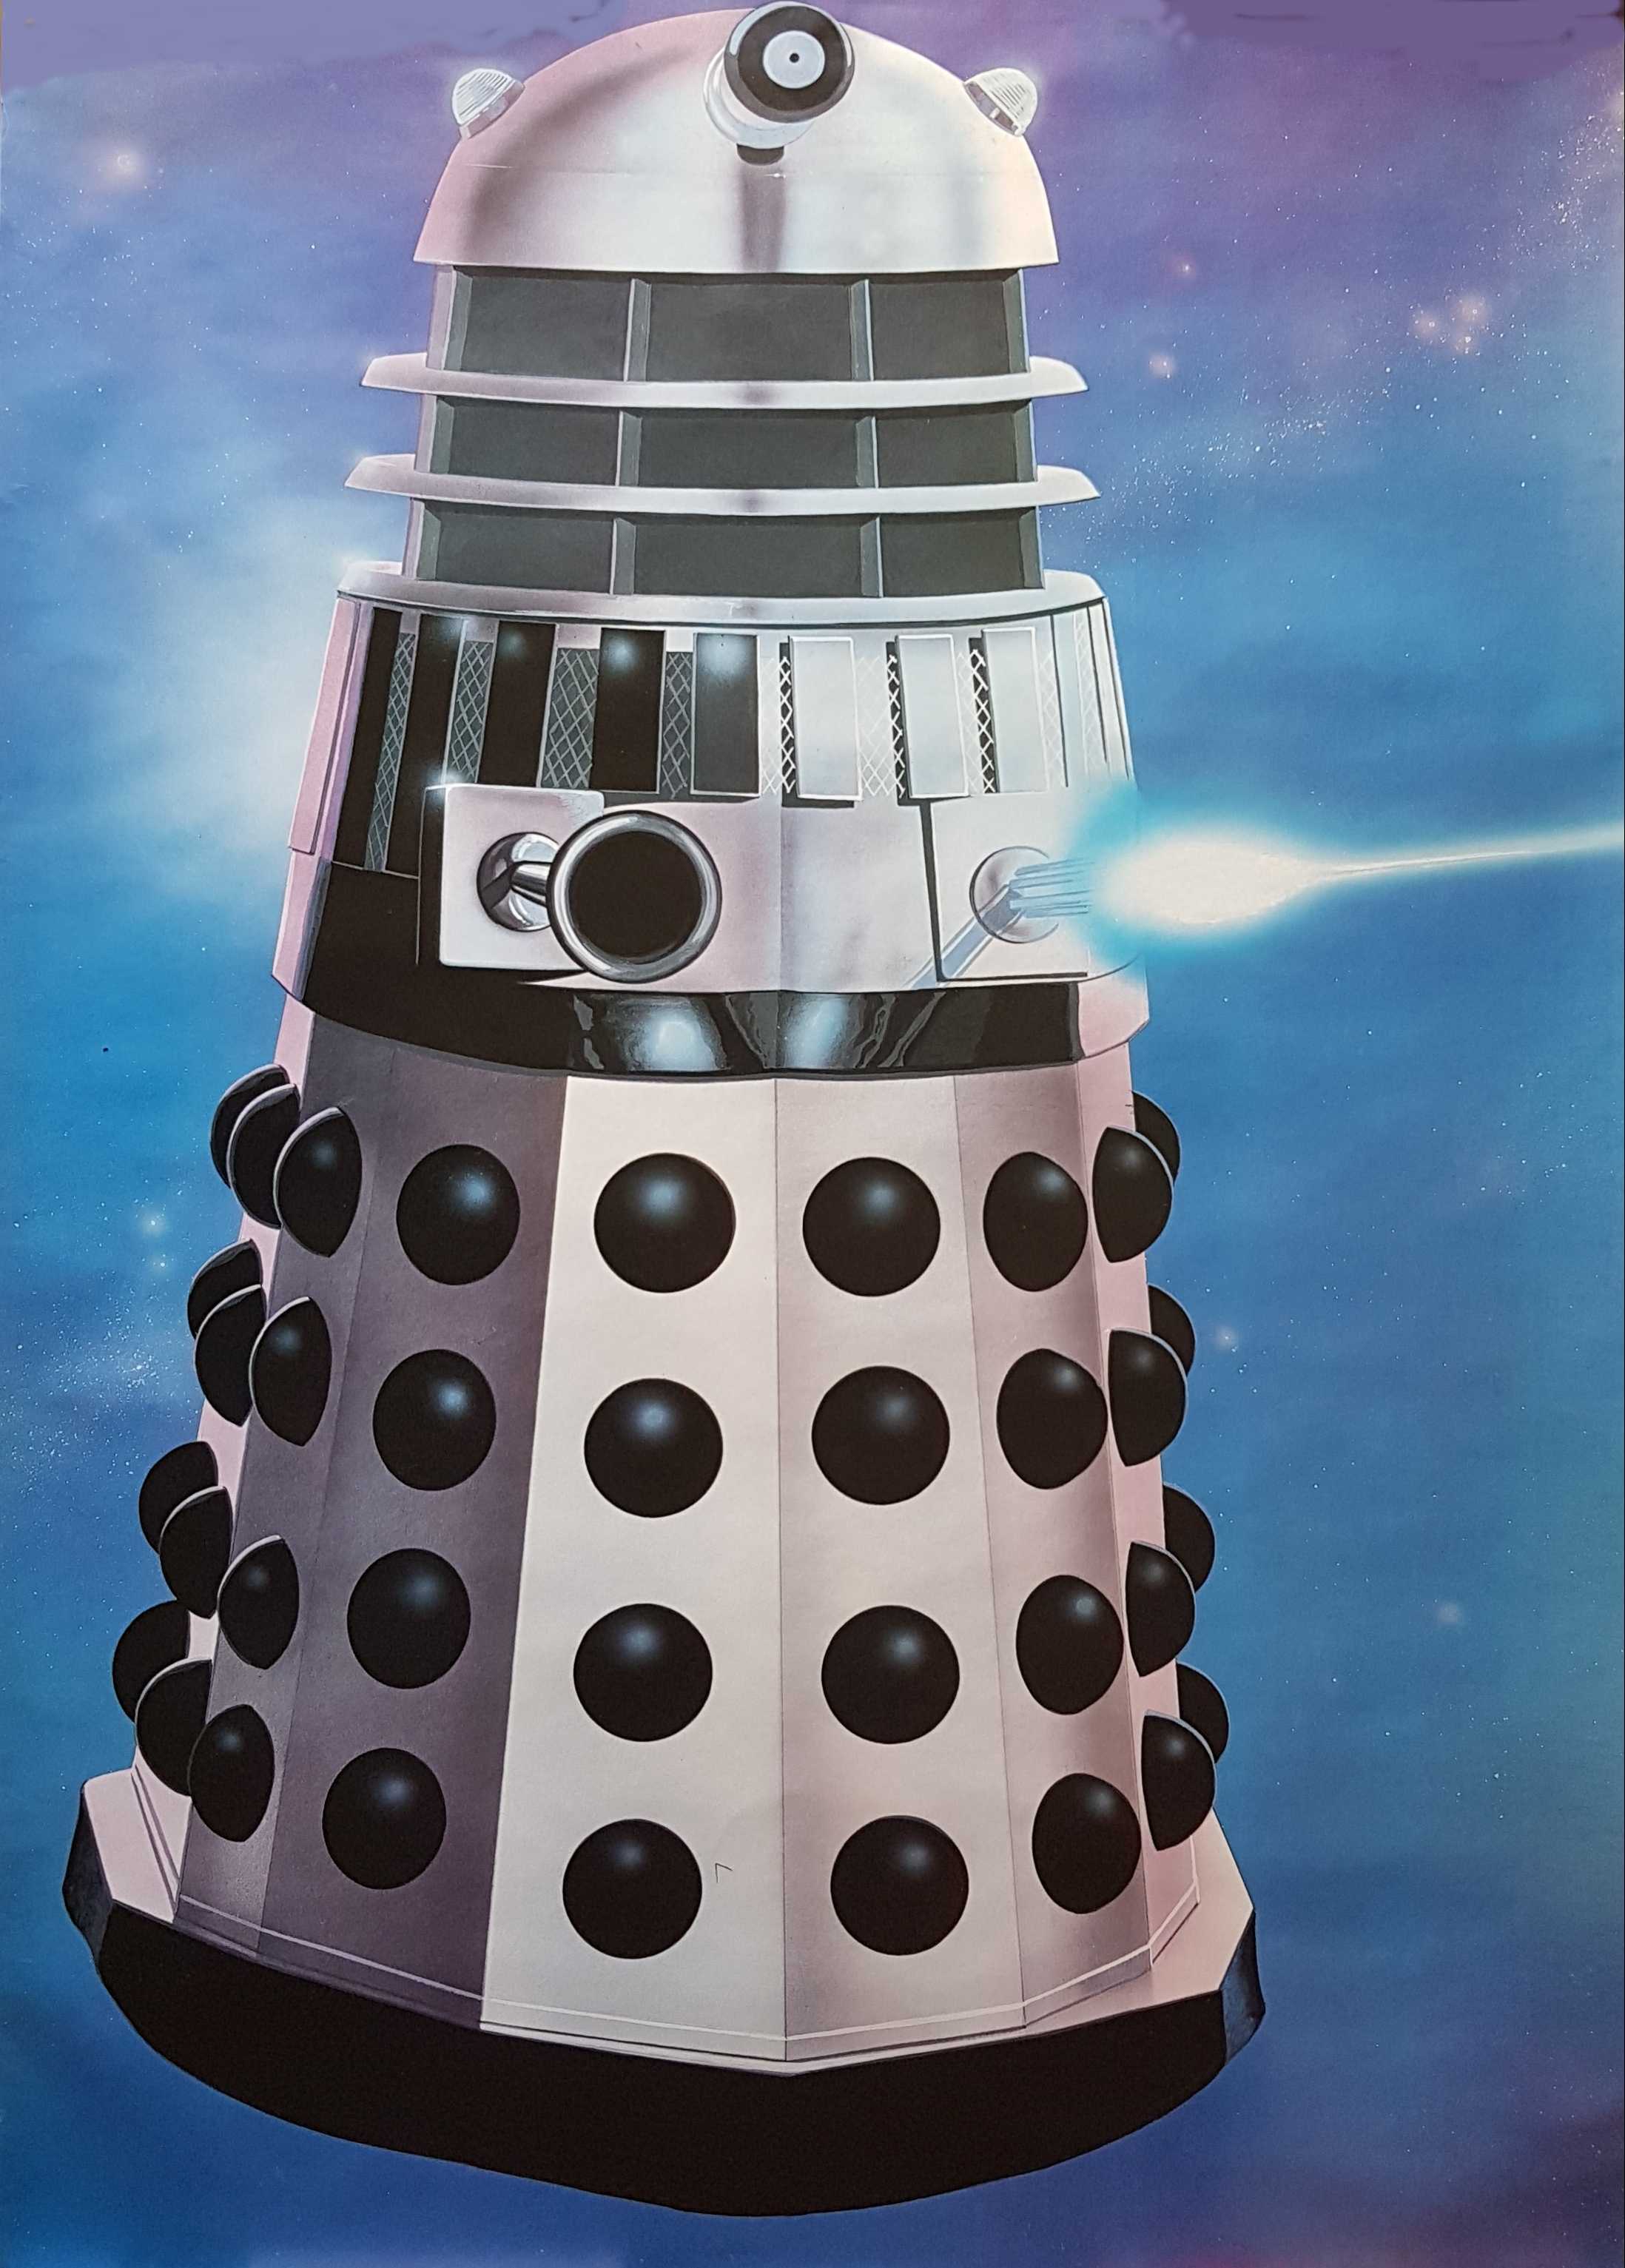 Picture of Doctor Who - Dalek by artist Unknown from the BBC posters - Records and Tapes library